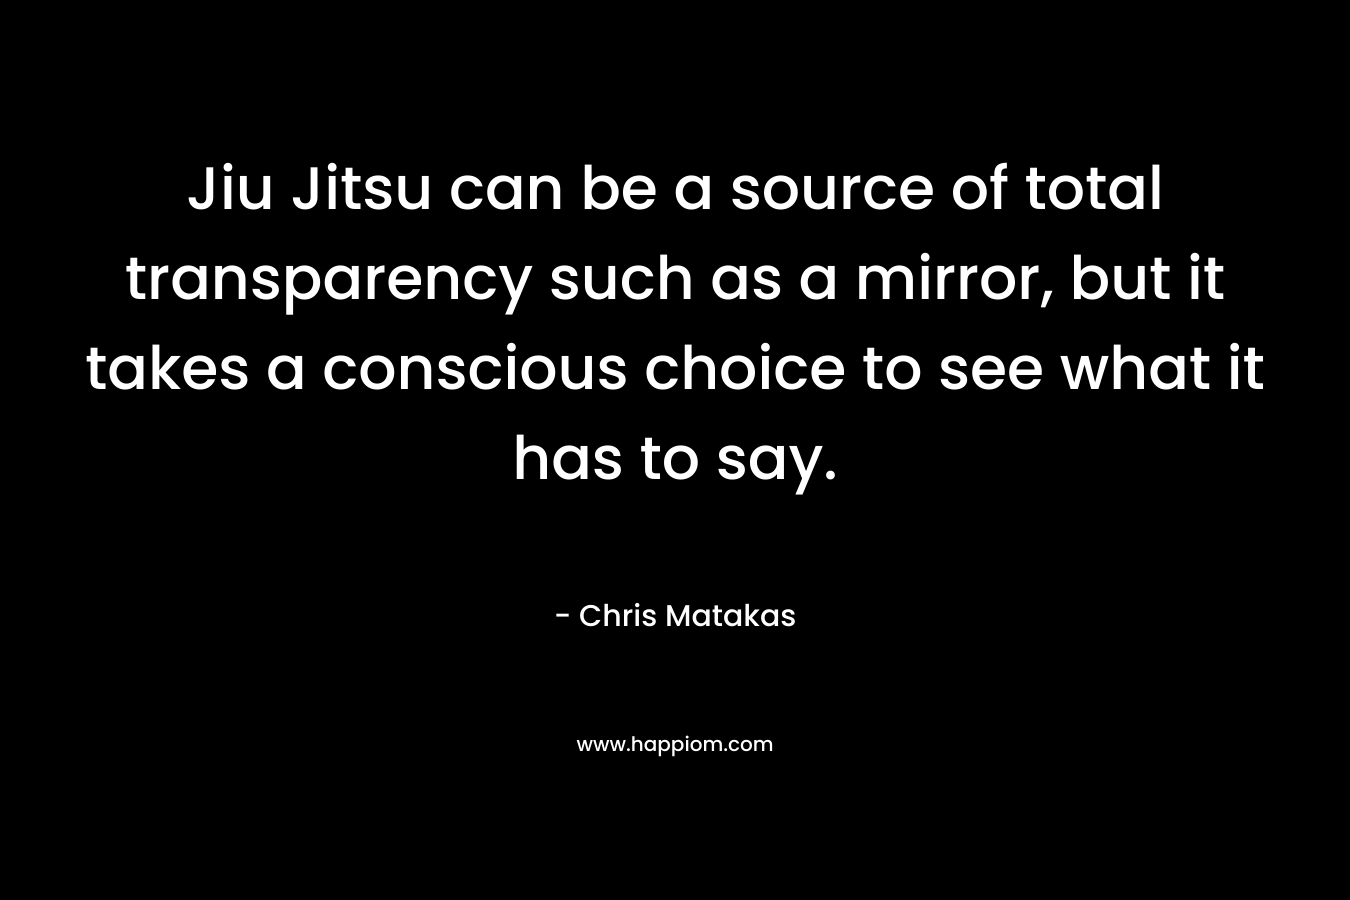 Jiu Jitsu can be a source of total transparency such as a mirror, but it takes a conscious choice to see what it has to say.